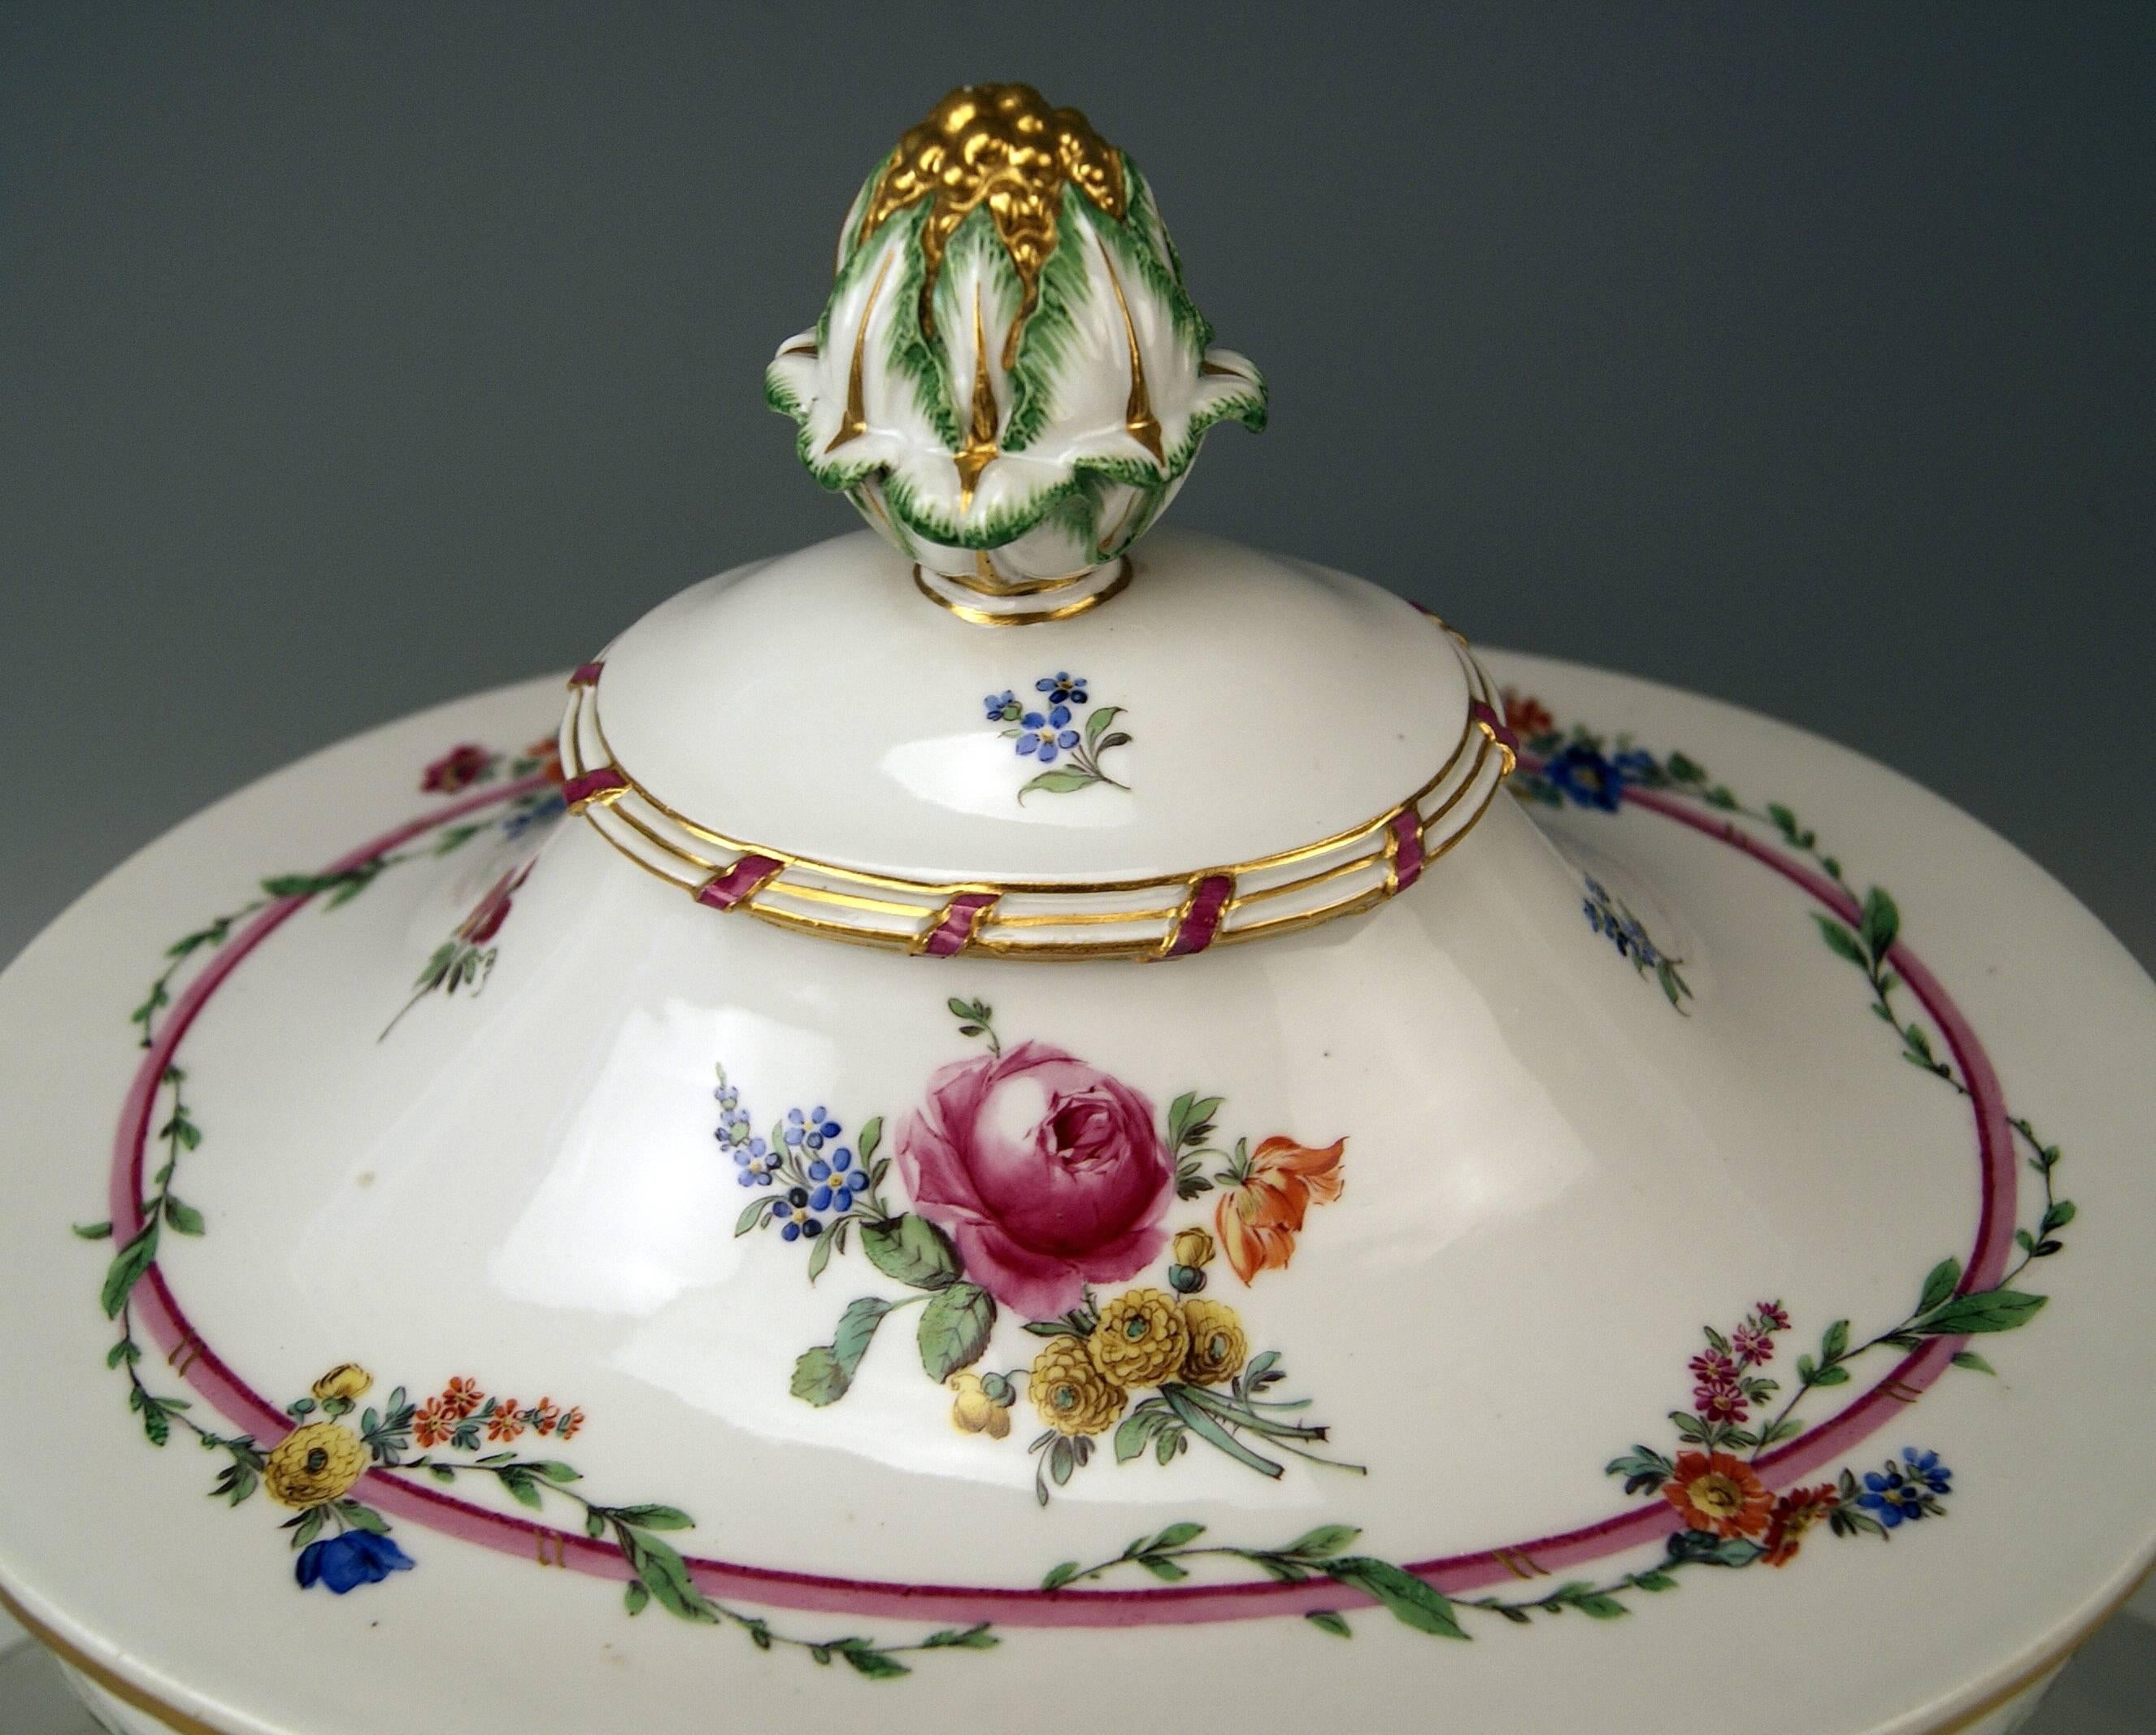 Late 18th Century Meissen Large Lidded Tureen with Huge Platter Presentoir, Marcolini Period